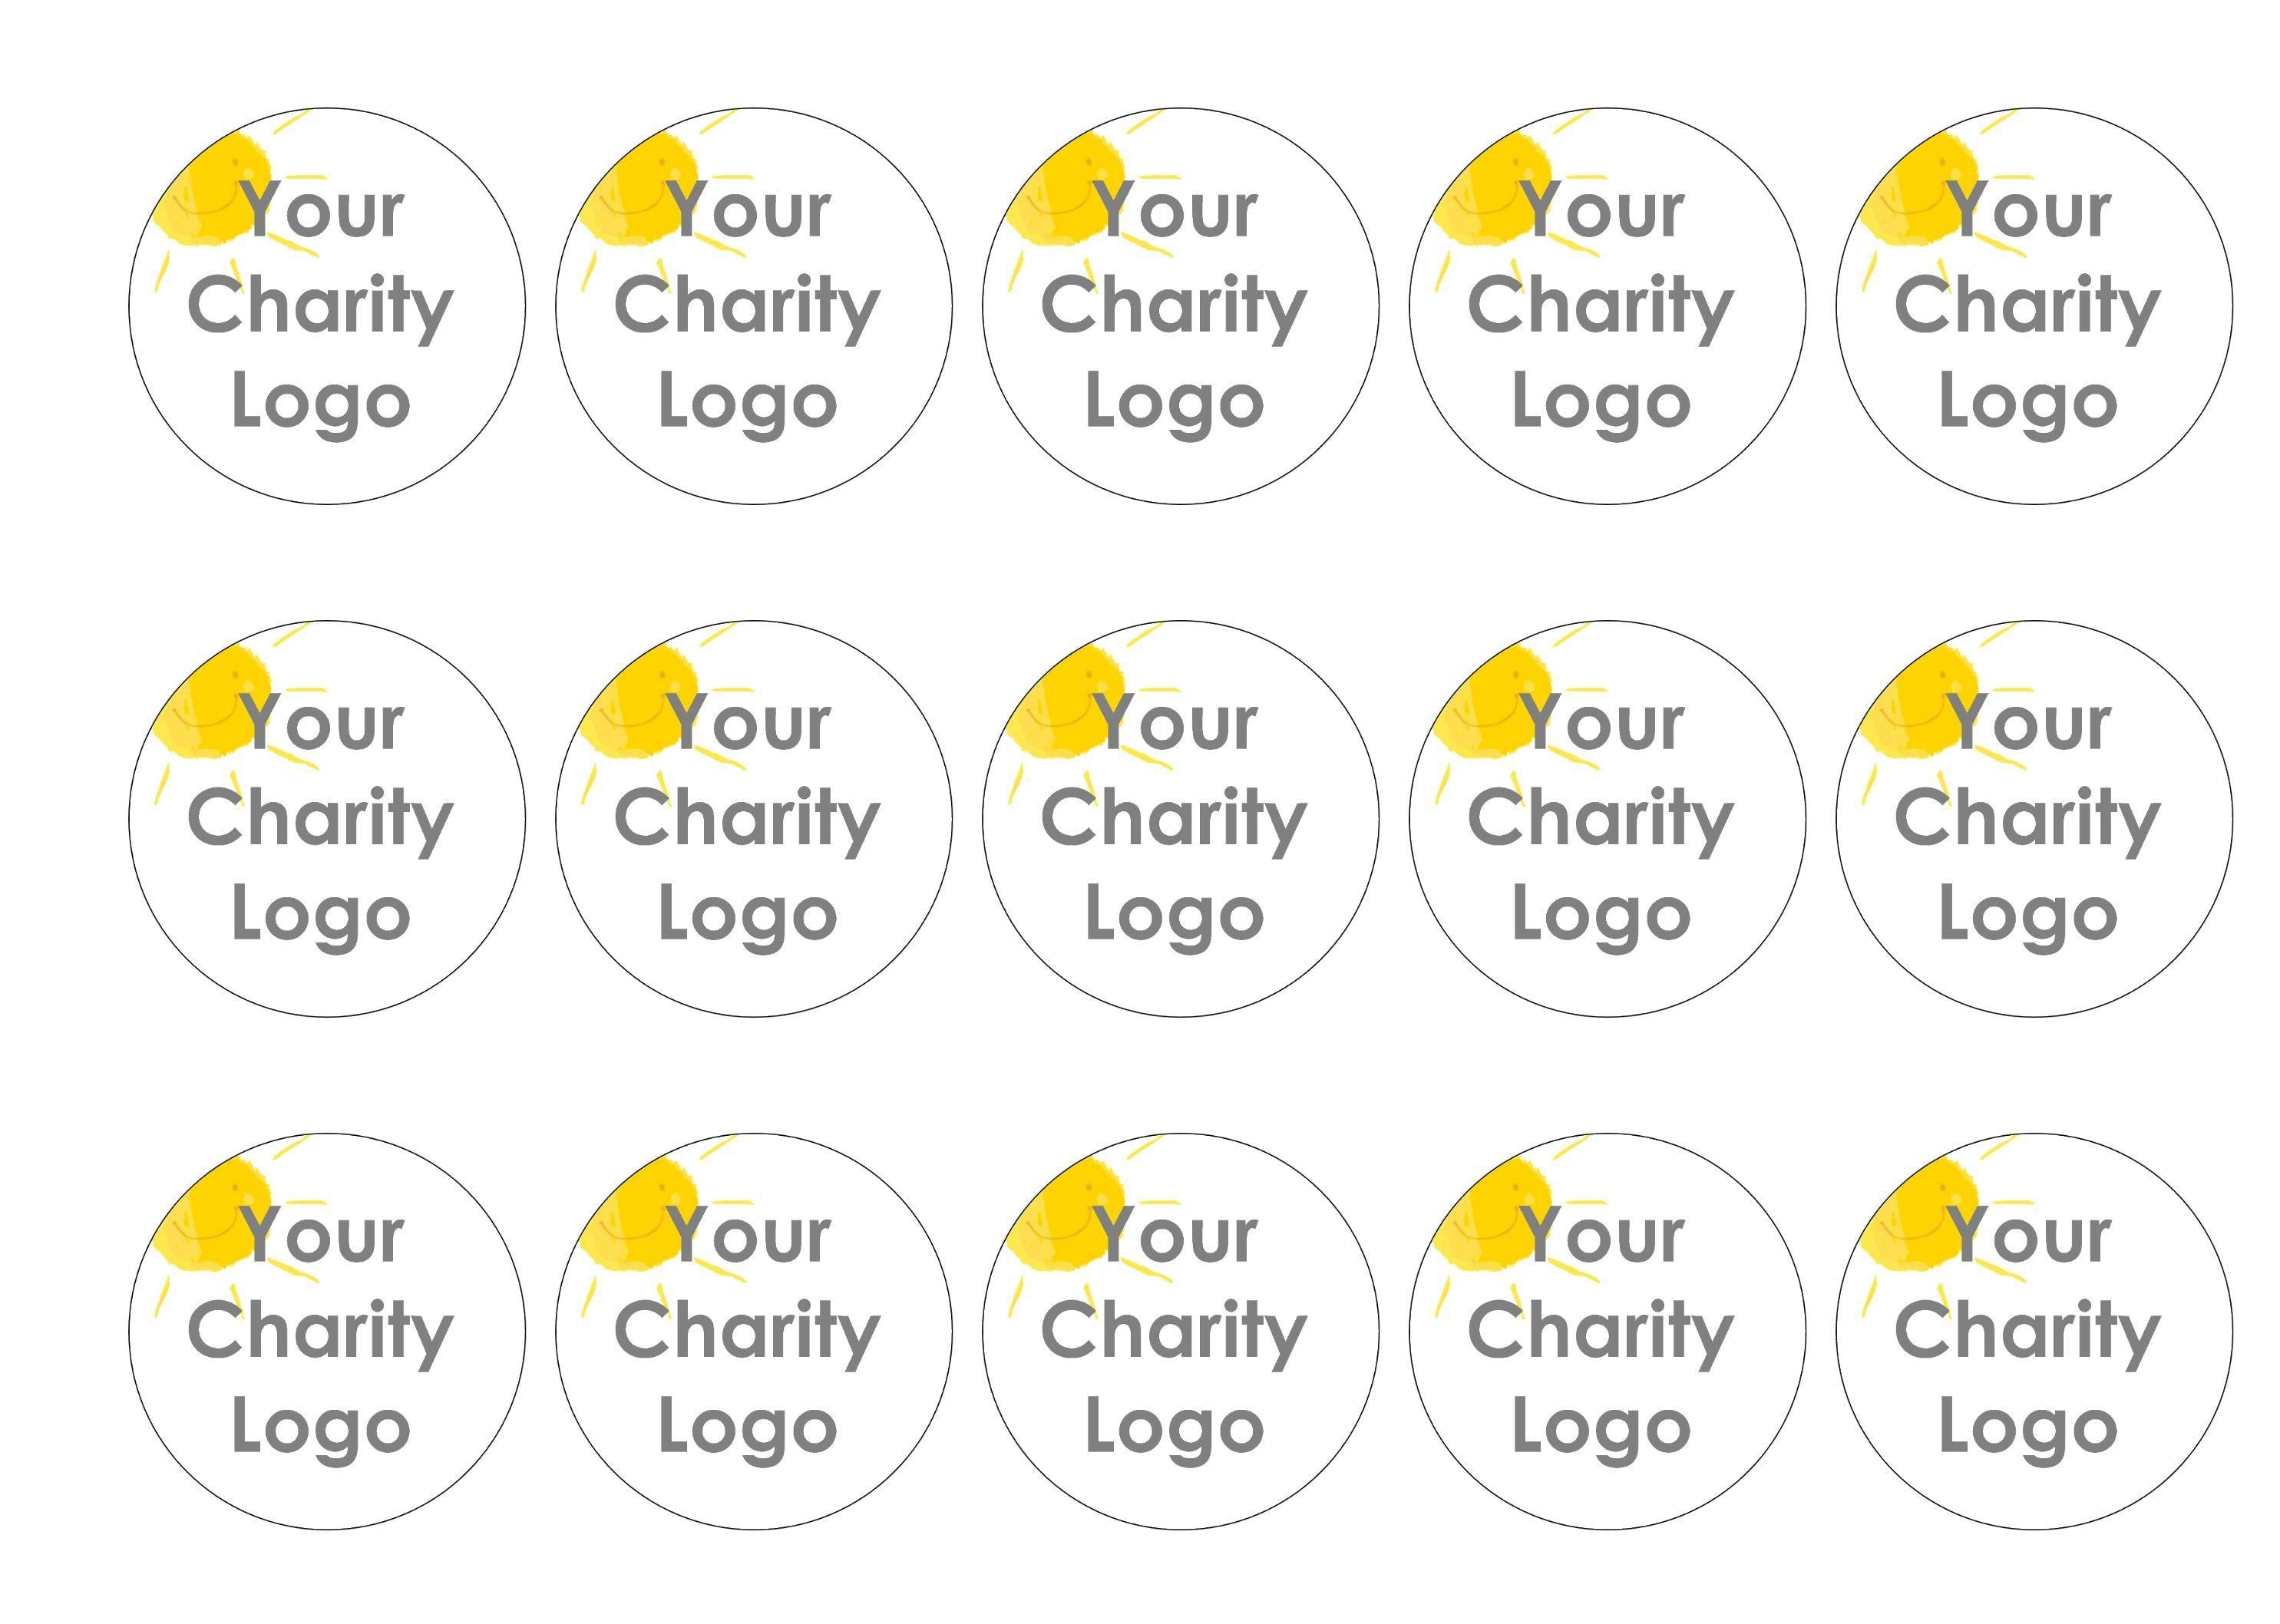 15 edible printed cake toppers with your charity logo